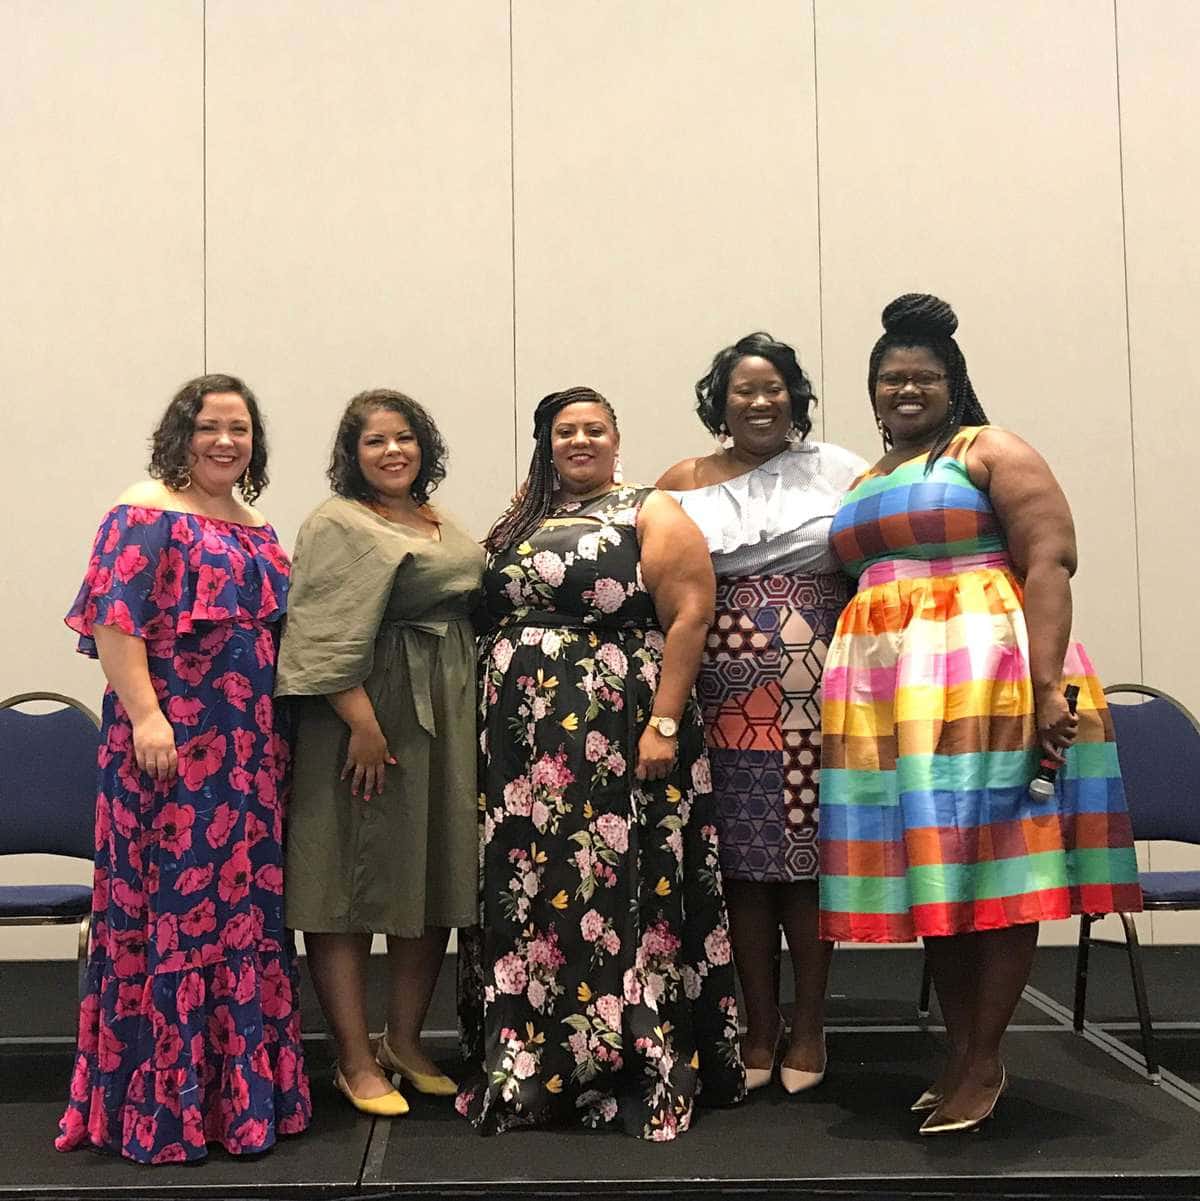 TCFStyle Expo Panel: Style has No Age or Size featuring Grown and Curvy Woman, The Jenesaisquoi, The Real Sample Size, Suits Heels & Curves, and Wardrobe Oxygen